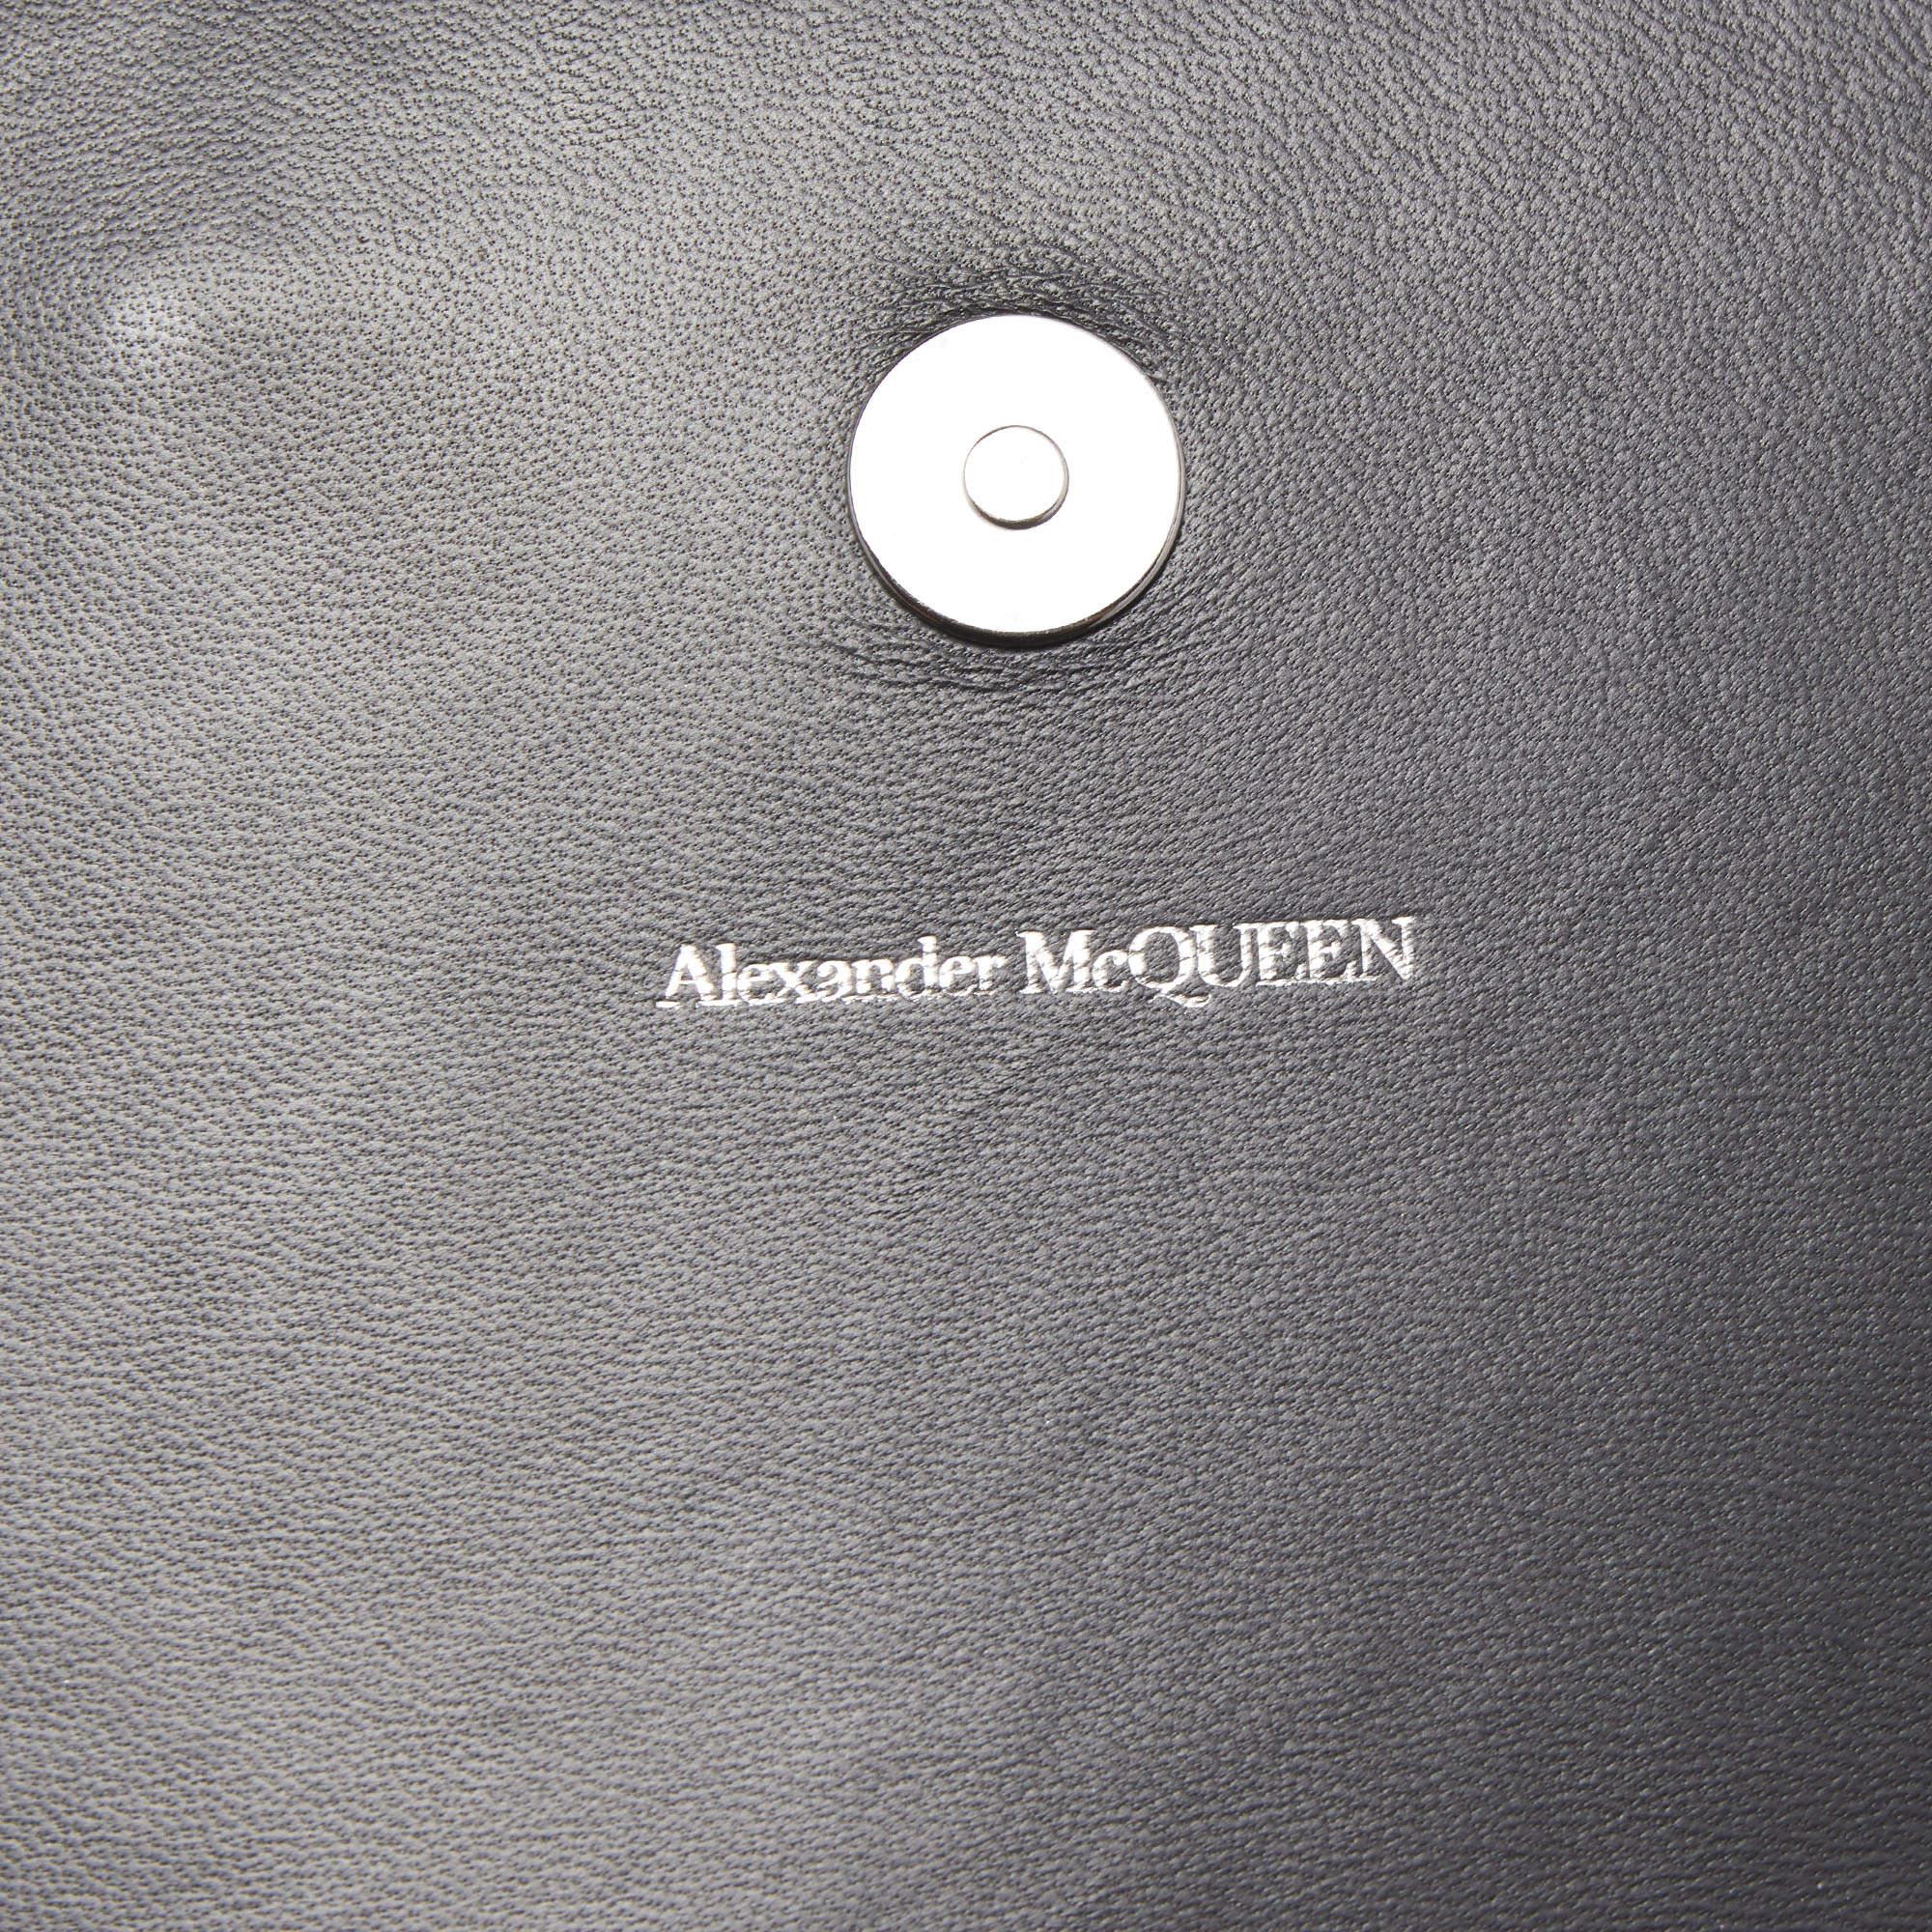 The fashion house’s tradition of excellence, coupled with modern design sensibilities, works to make this Alexander McQueen bag one of a kind. It's a fabulous accessory with the power to highlight any outfit.

